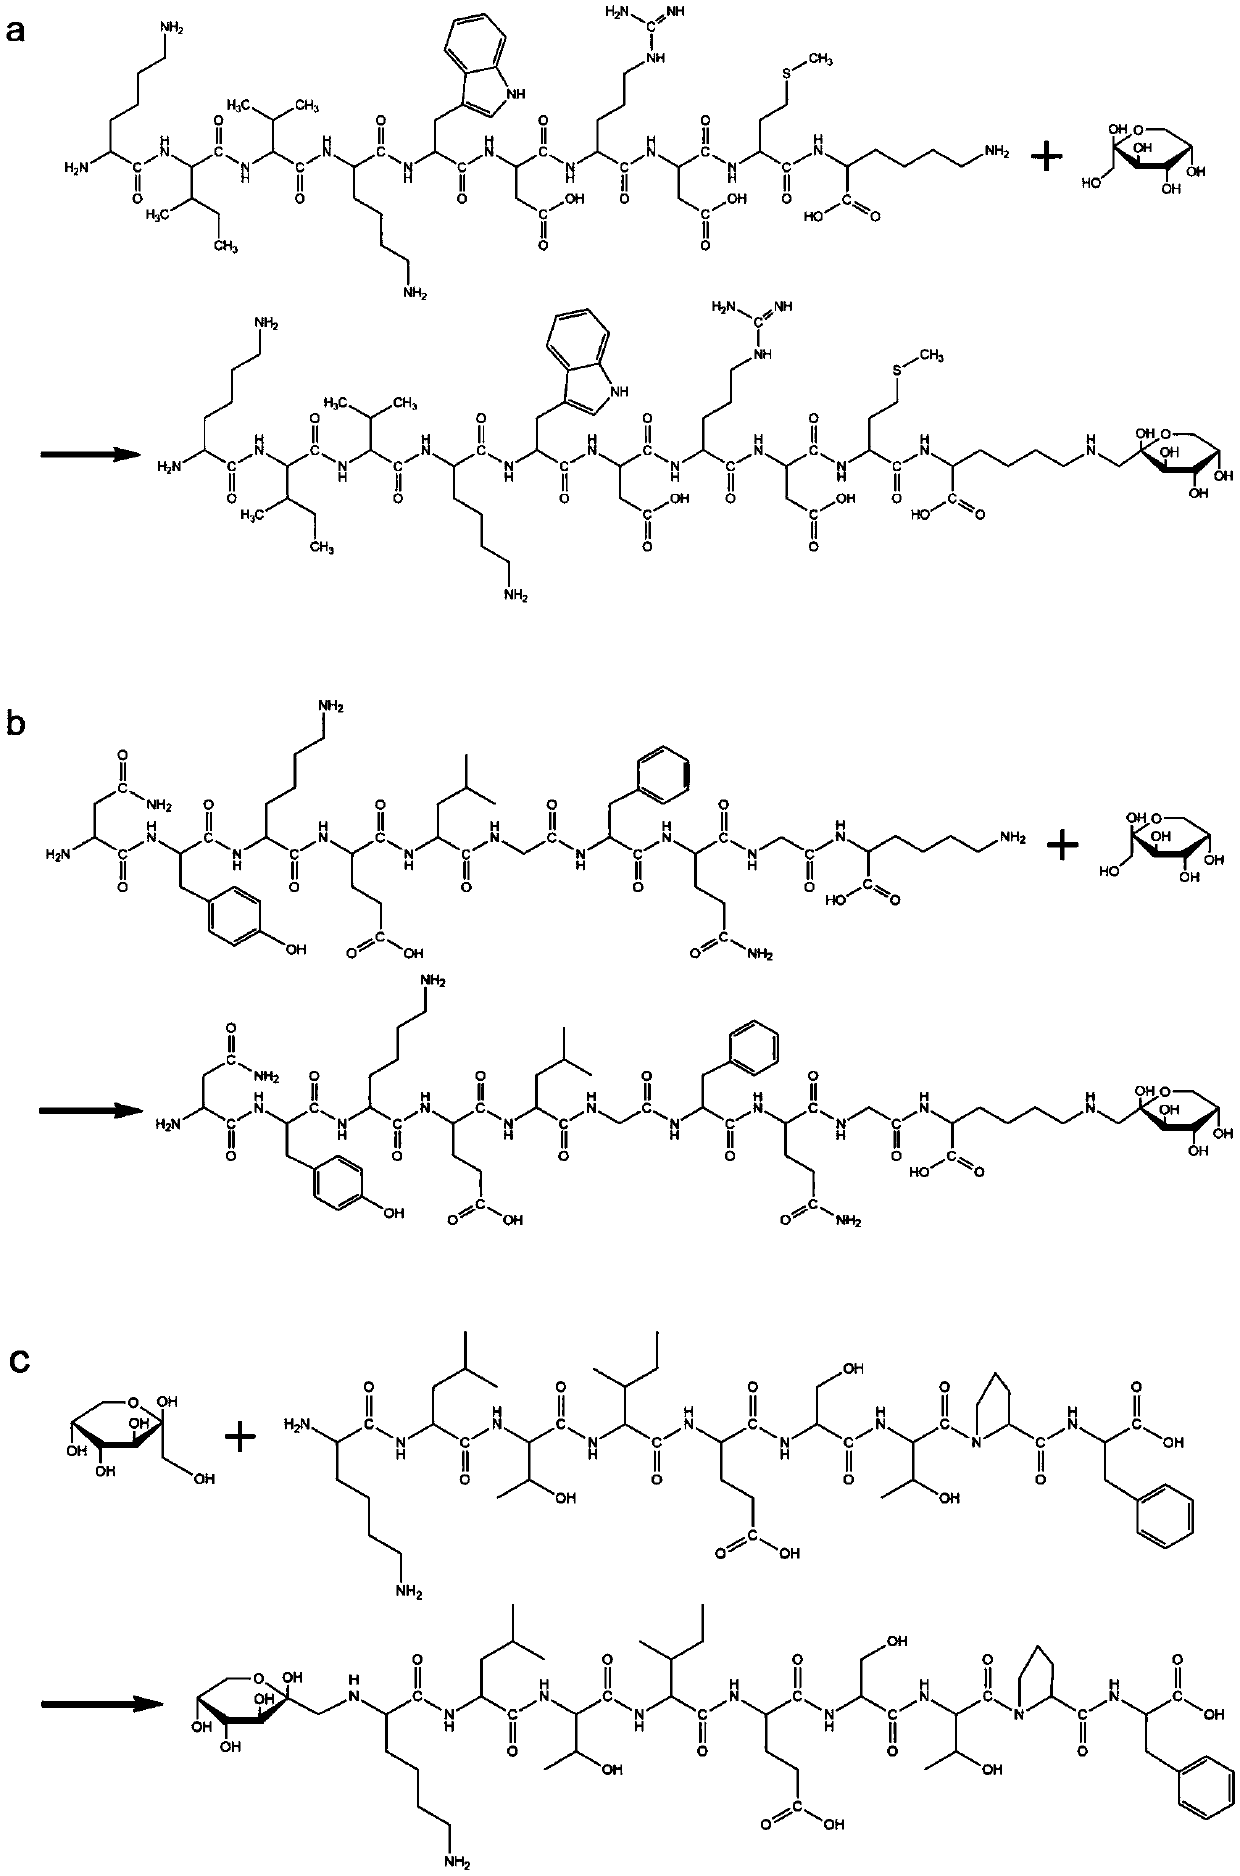 Common and convenient epitope imprinting method and application of molecular imprinting polymer